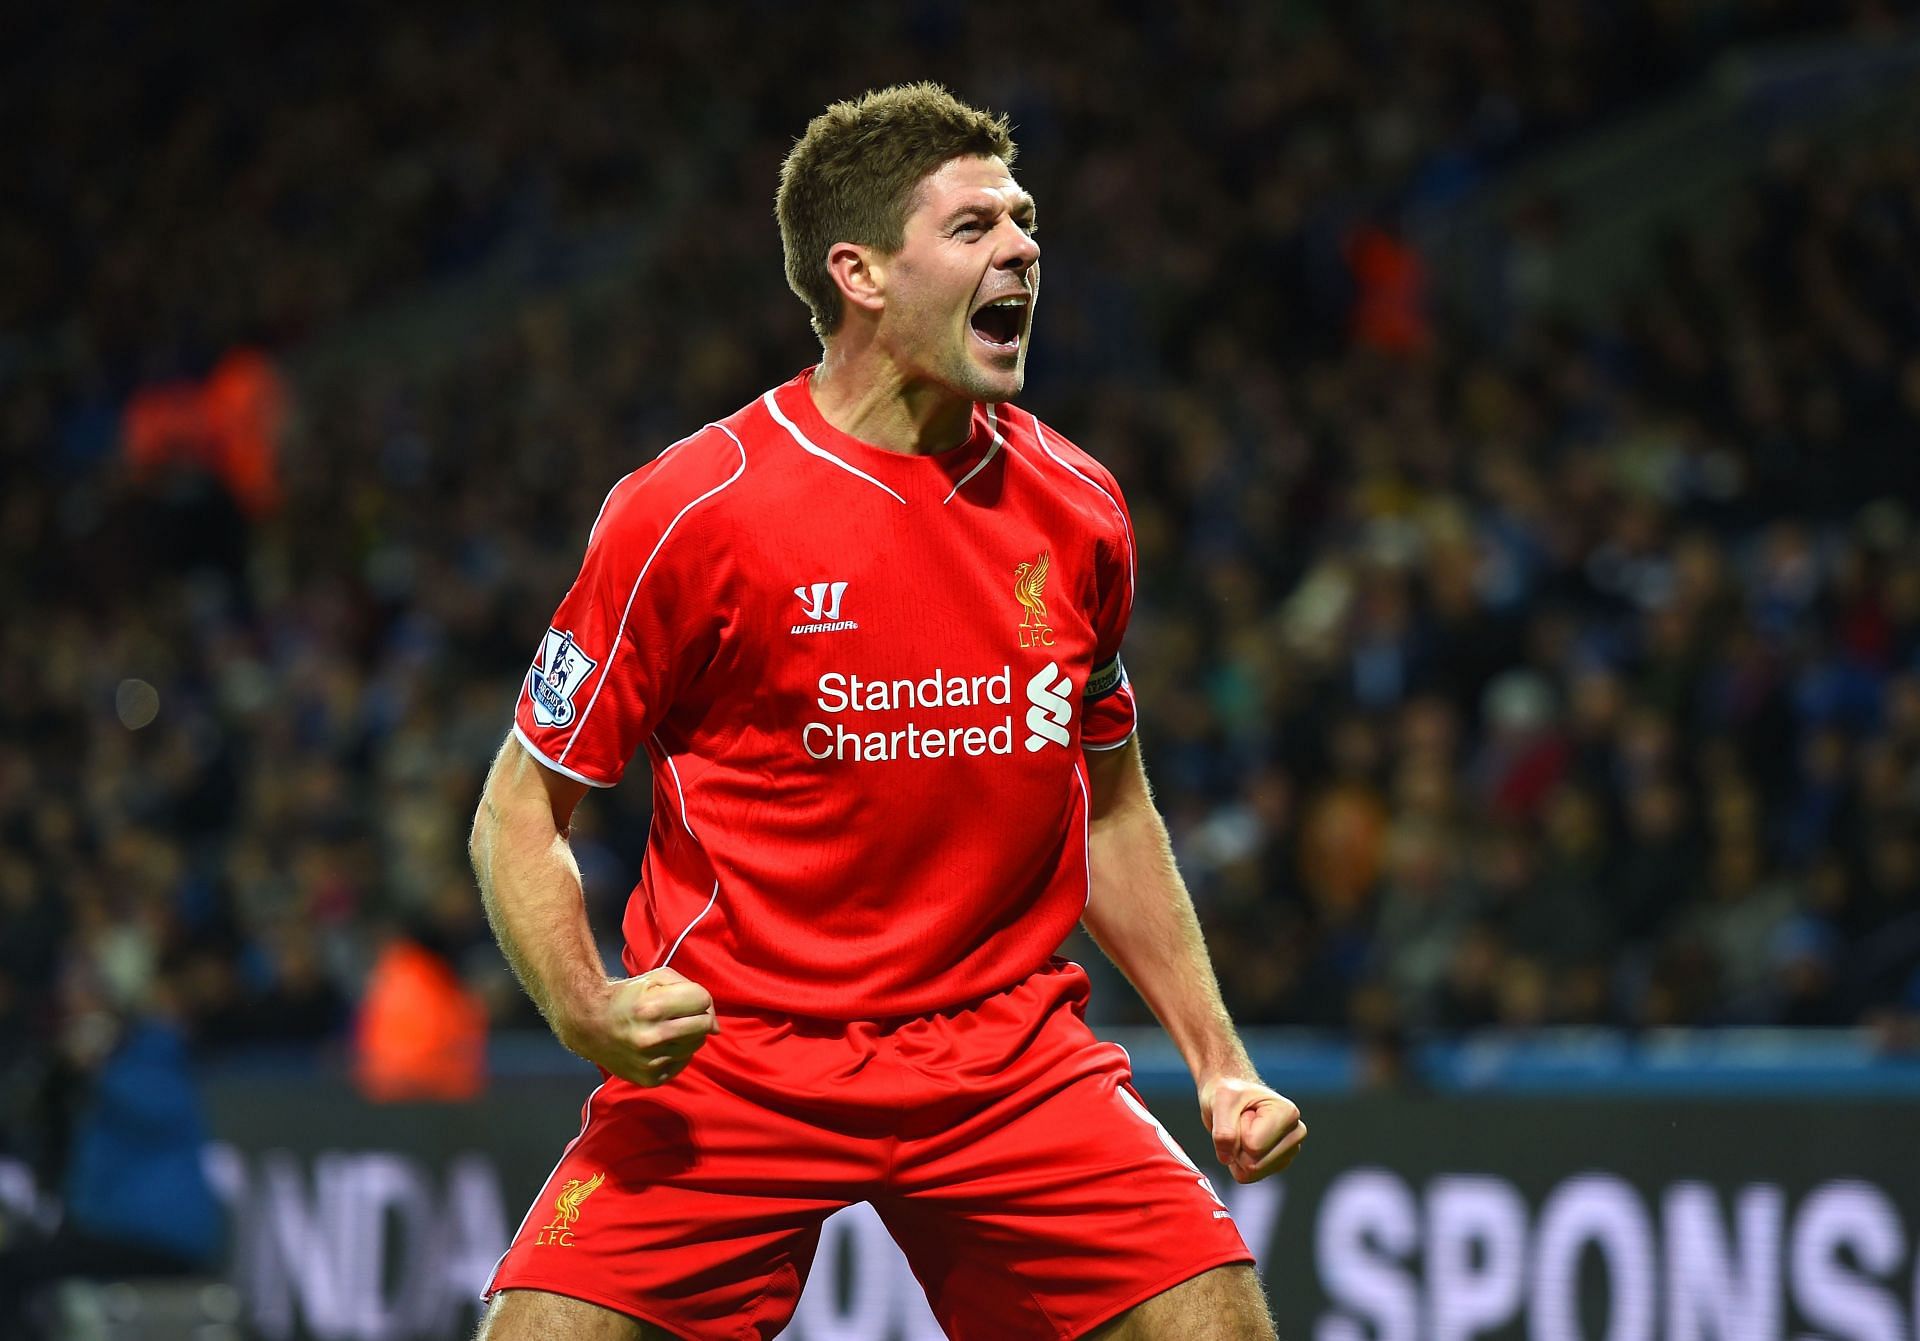 Gerrard stayed with Liverpool throughout his stay in the Premier League